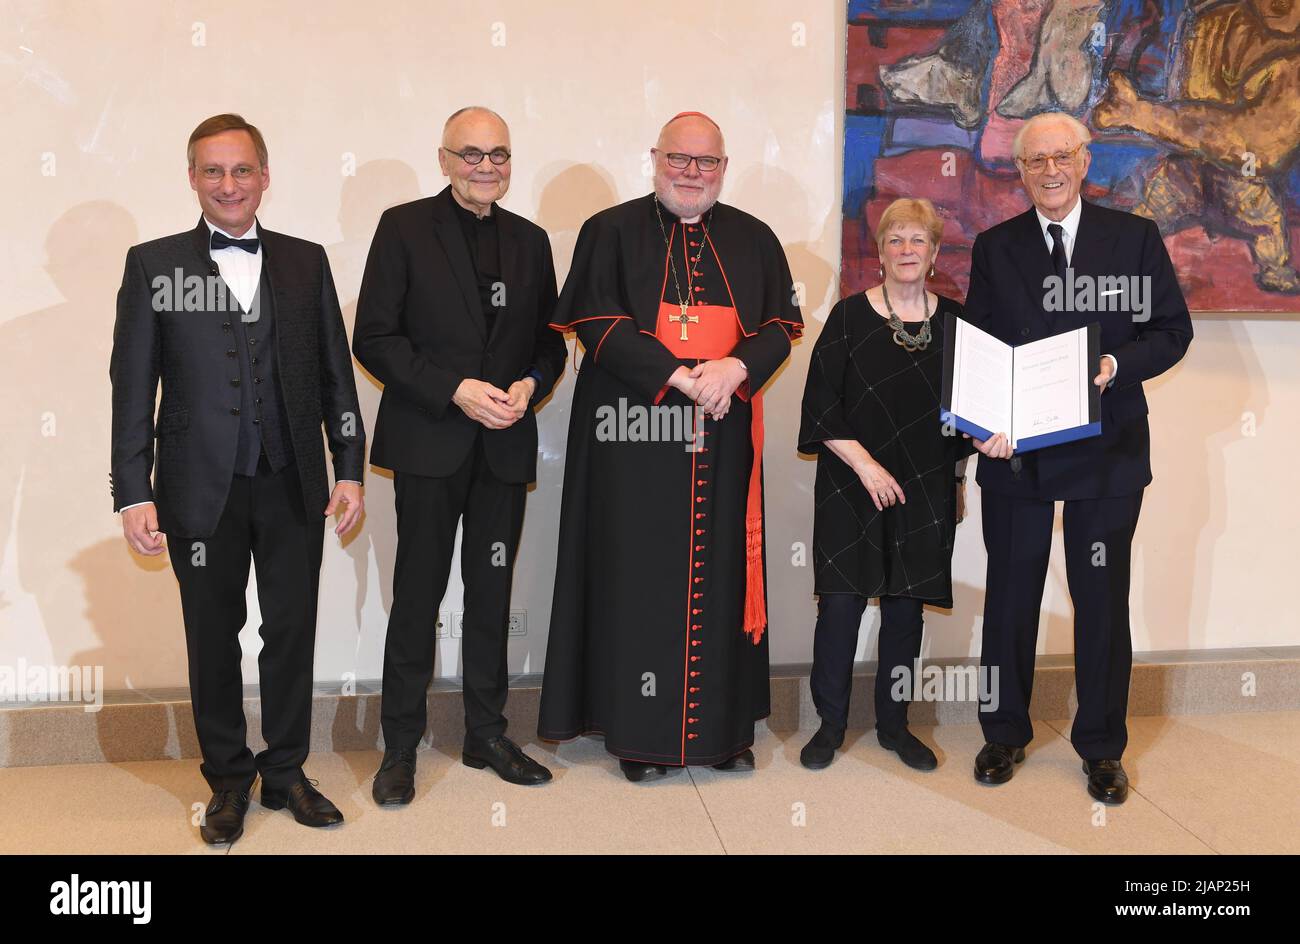 31 May 2022, Bavaria, Munich: Achim Budde (l-r), director of the 'Catholic Academy in Bavaria,' theologian, priest and art expert Friedhelm Mennekes, Cardinal Reinhard Marx, art historian Carla Schulz-Hoffmann and Duke Franz of Bavaria stand together at the presentation of the Romano-Guardini Prize to Duke Franz of Bavaria at the Catholic Academy of Bavaria. The 88-year-old head of the House of Wittelsbach, Duke Franz of Bavaria, receives the 10,000-euro award for his lifelong commitment to areas of culture and science at the Catholic Academy of Bavaria. Photo: Felix Hörhager/dpa Stock Photo